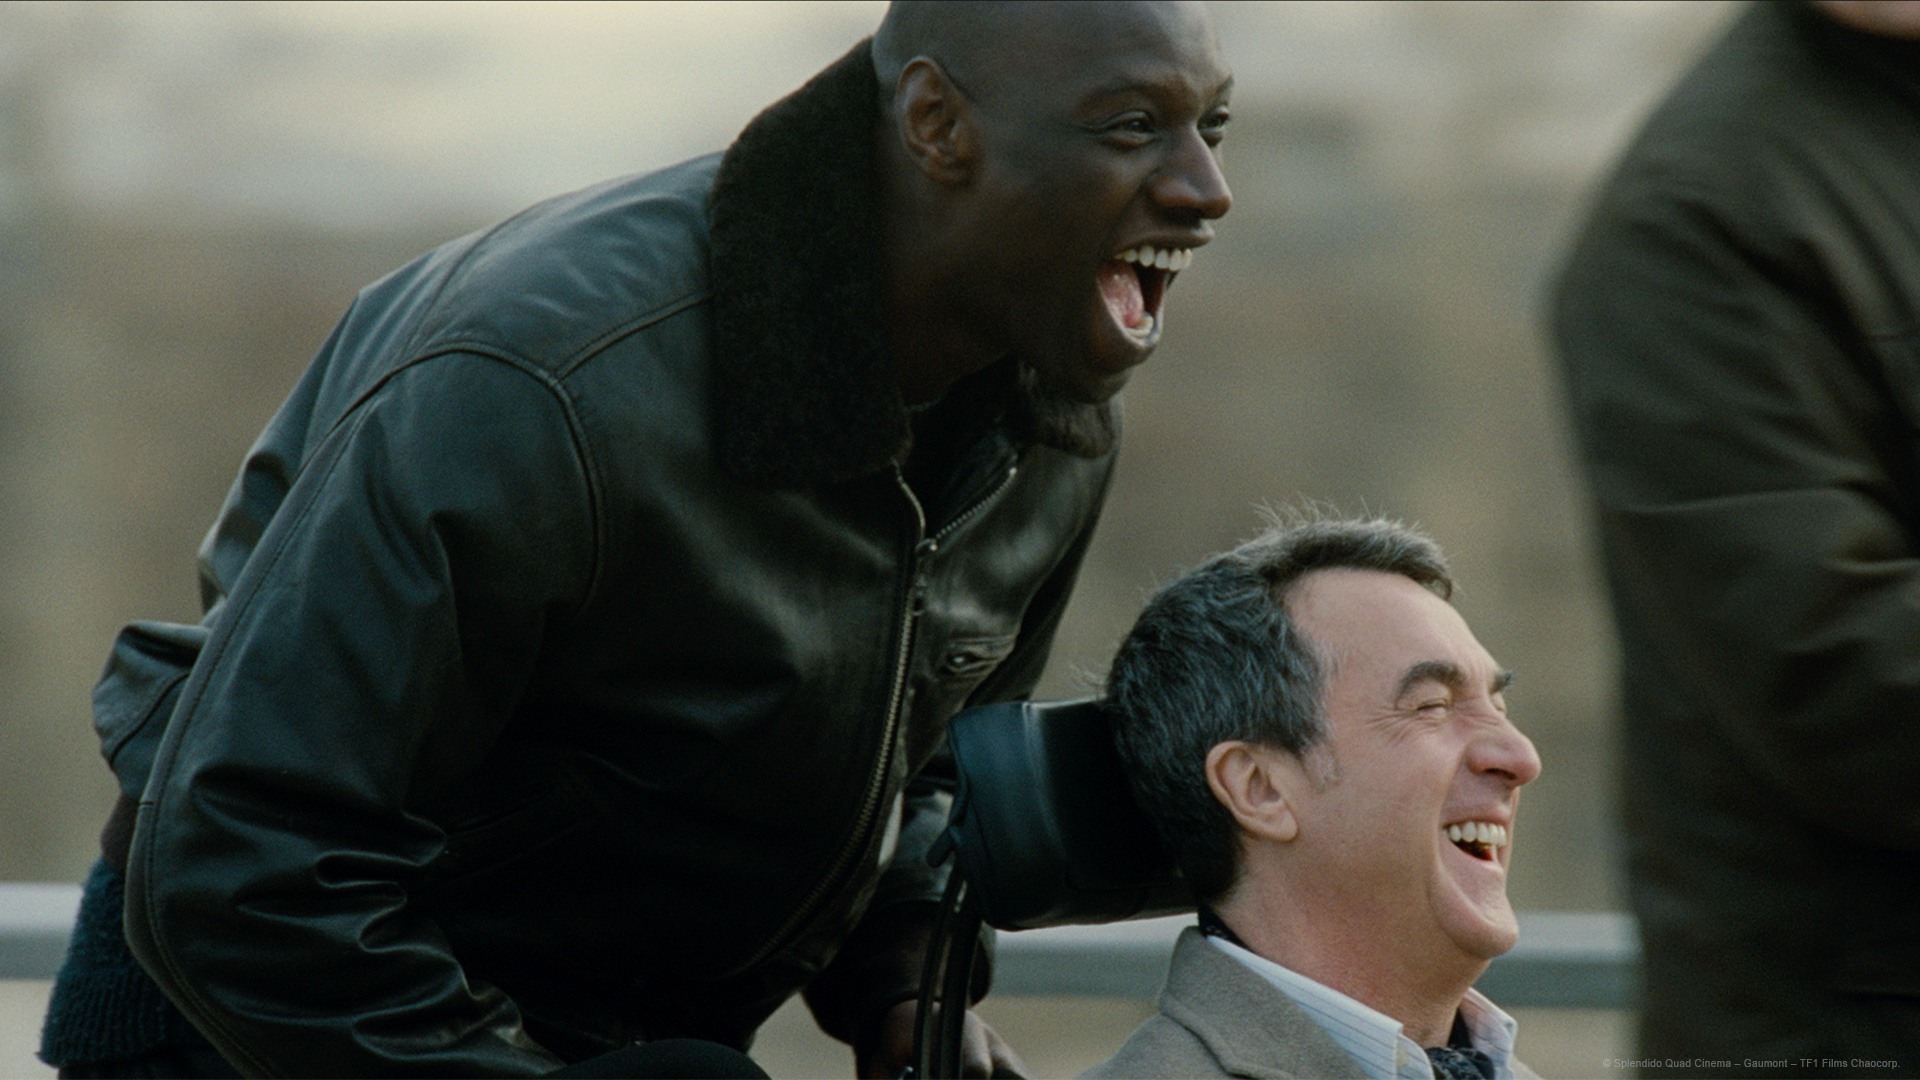 Untouchable / The Intouchables | 2011 | movie review - YouTube